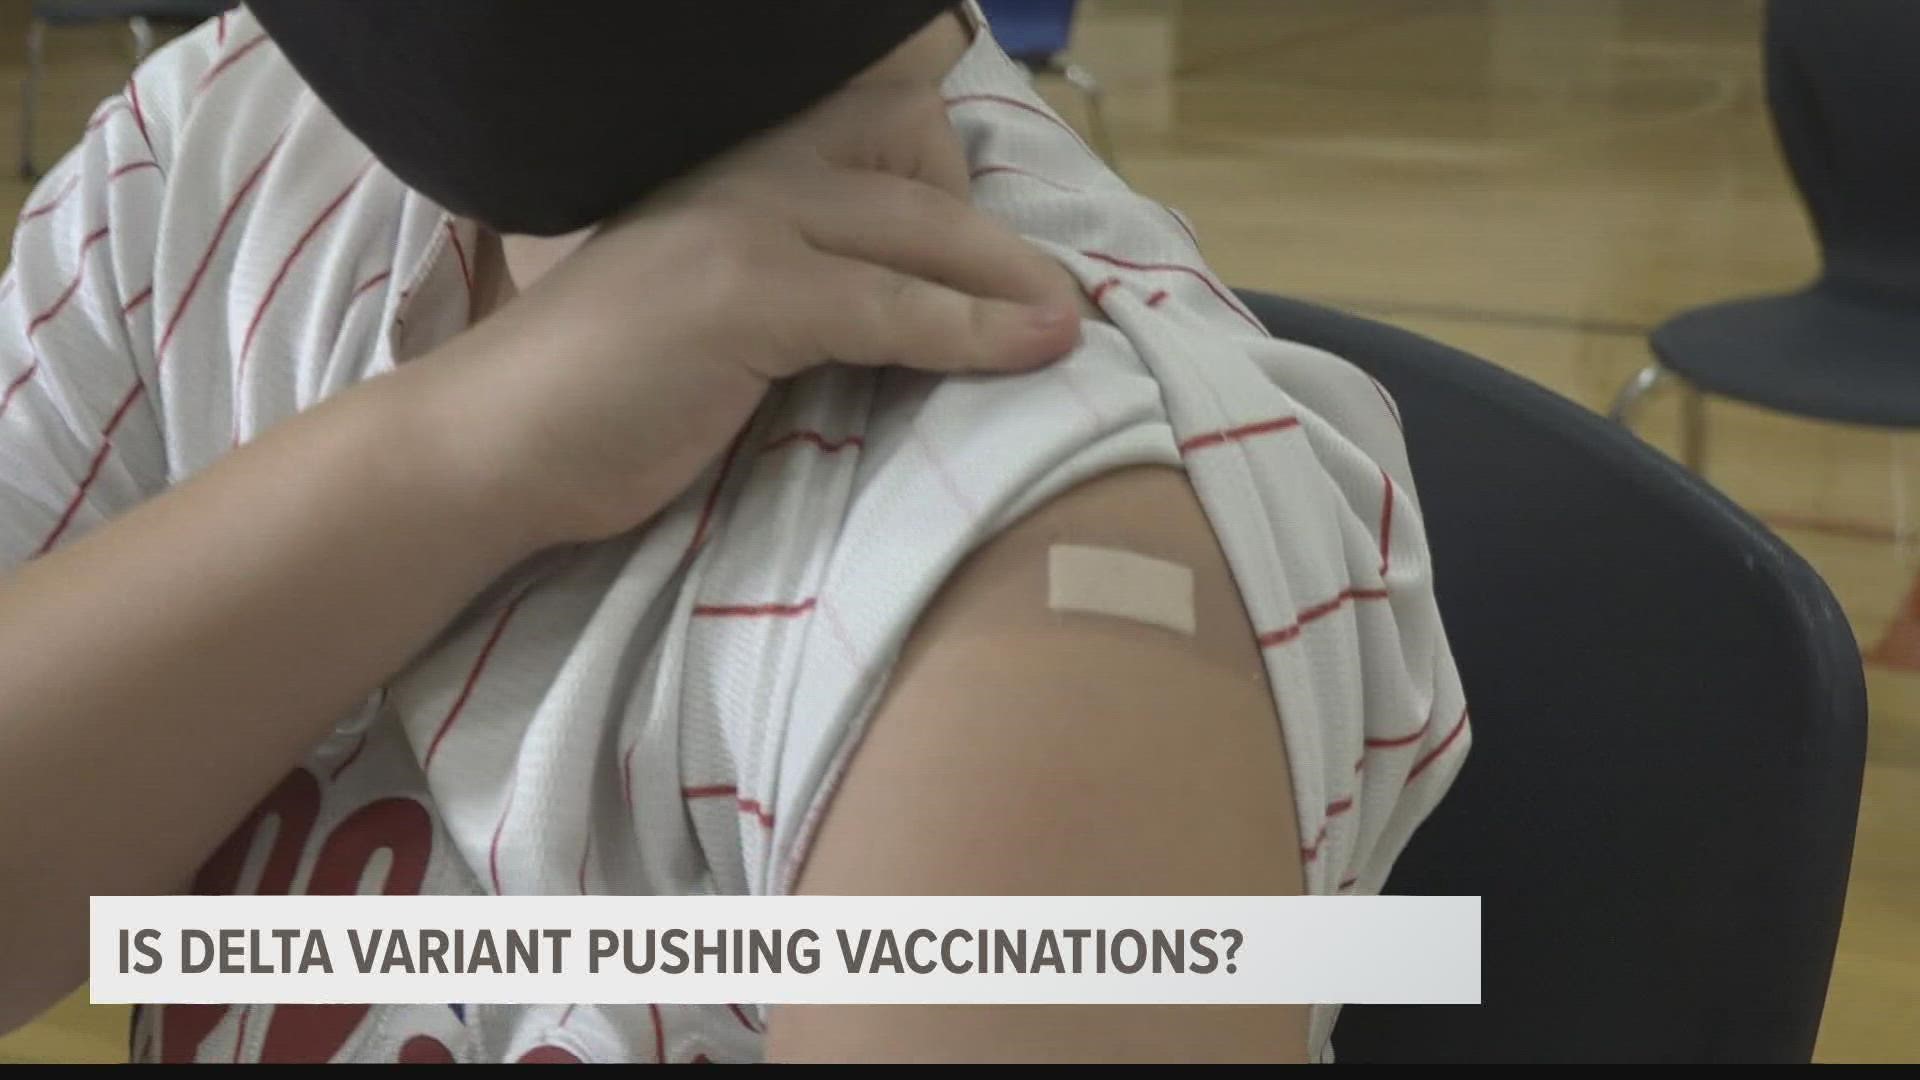 As of this weekend, data from Arizona's Department of Health Services shows at least 52% of Arizonans have received at least one shot of the COVID-19 vaccine.